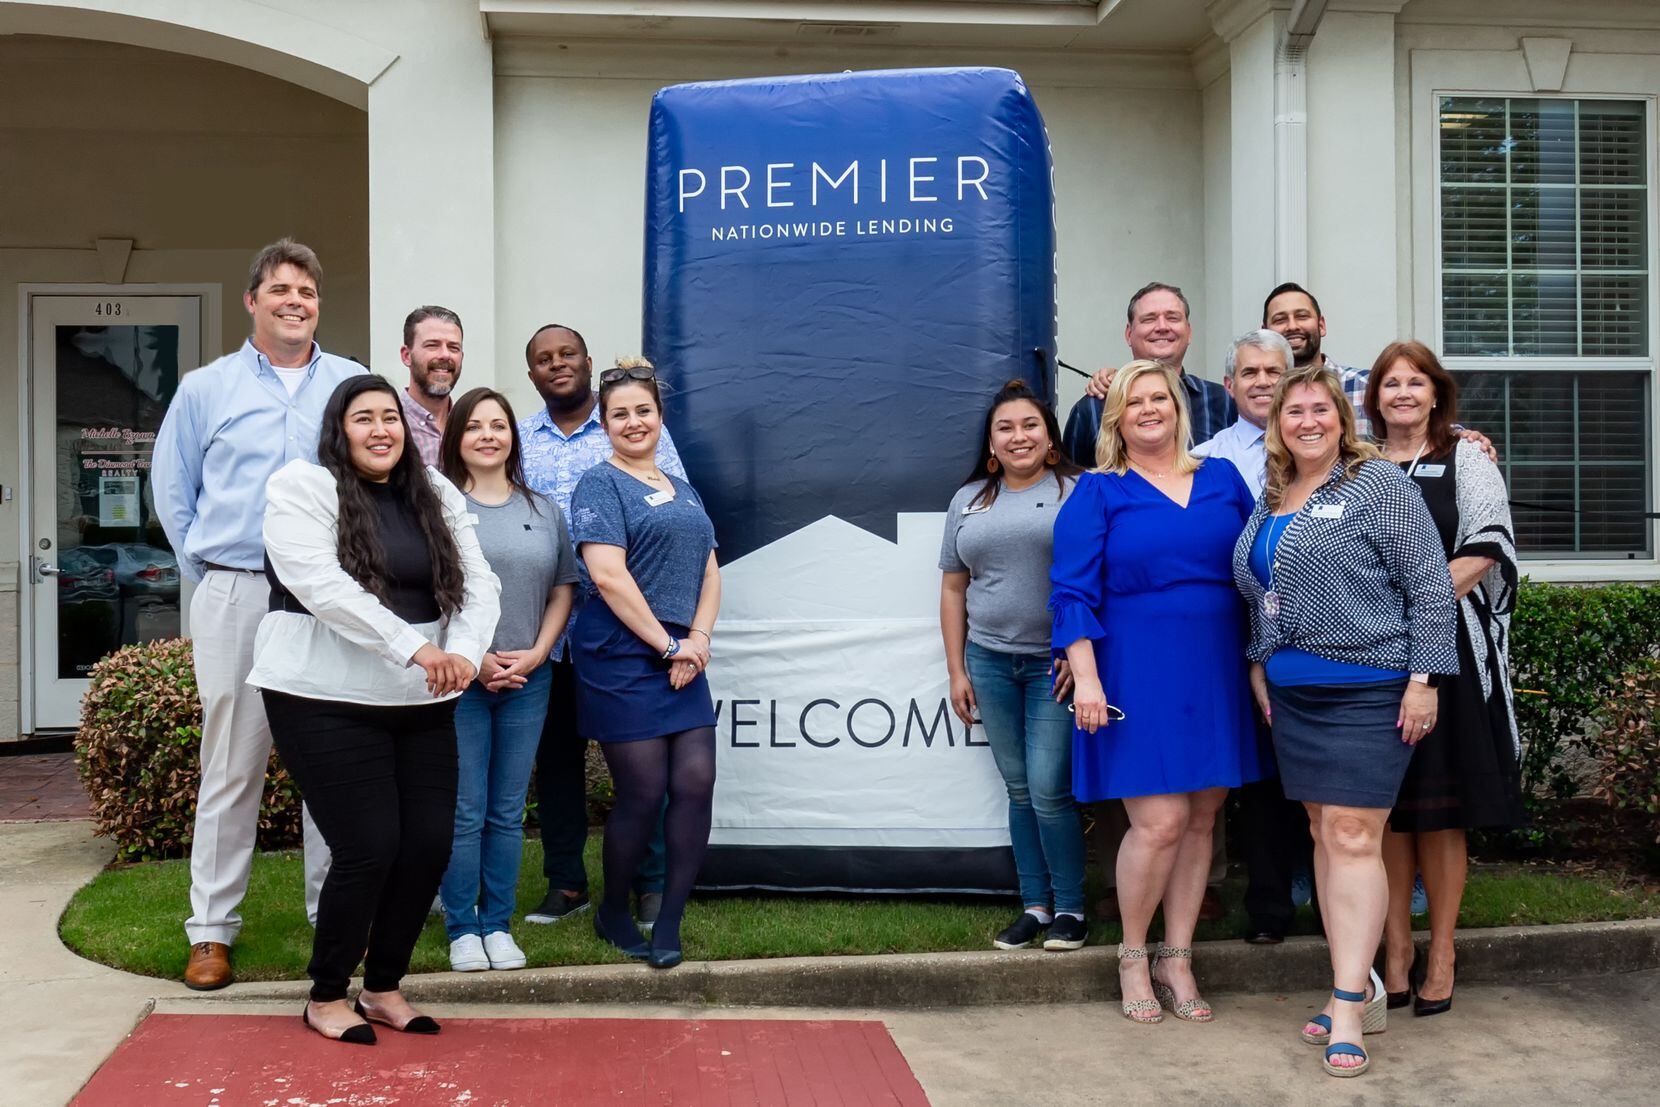 Premier Nationwide Lending employees are shown at a ribbon cutting for its branch in Flower...